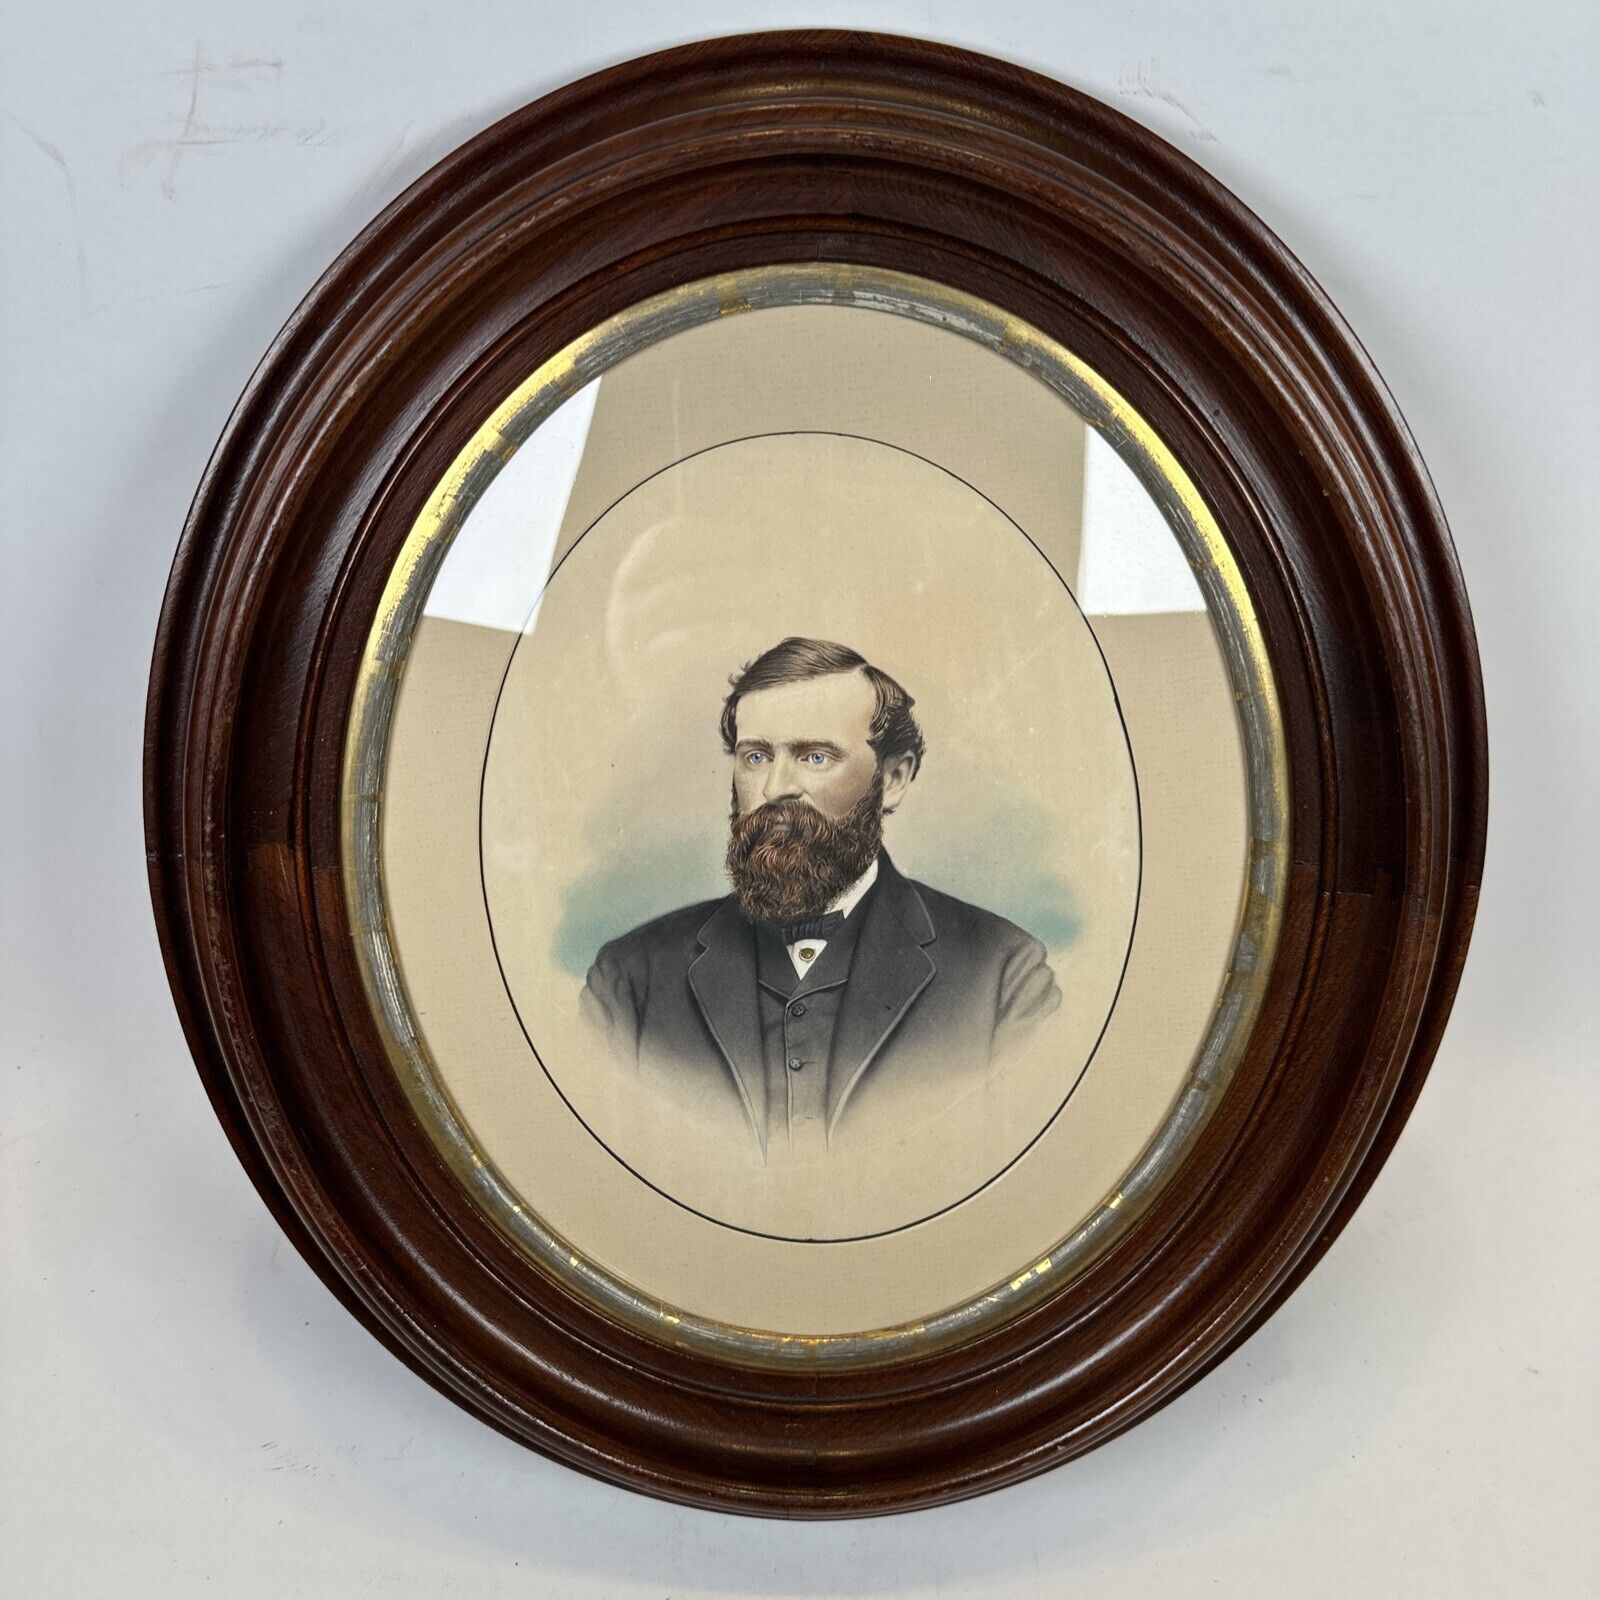 Antique Gentleman’s Portrait In Gilted Oval Wooden Frame, Colored Portrait